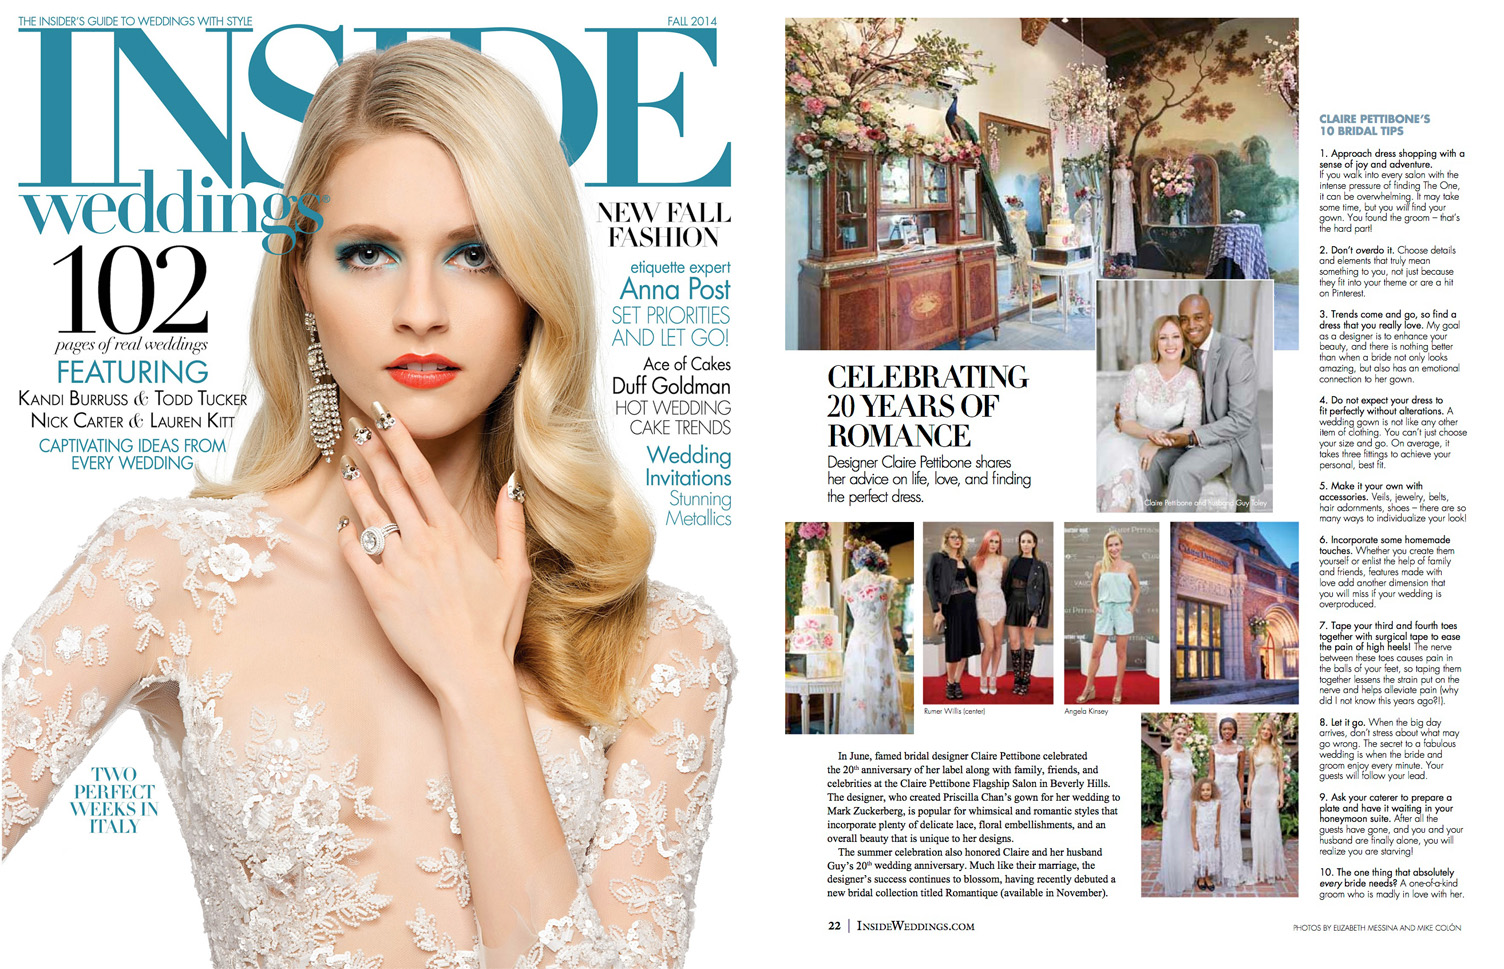 Claire Pettibone 20th Anniversary Published in Inside Weddings